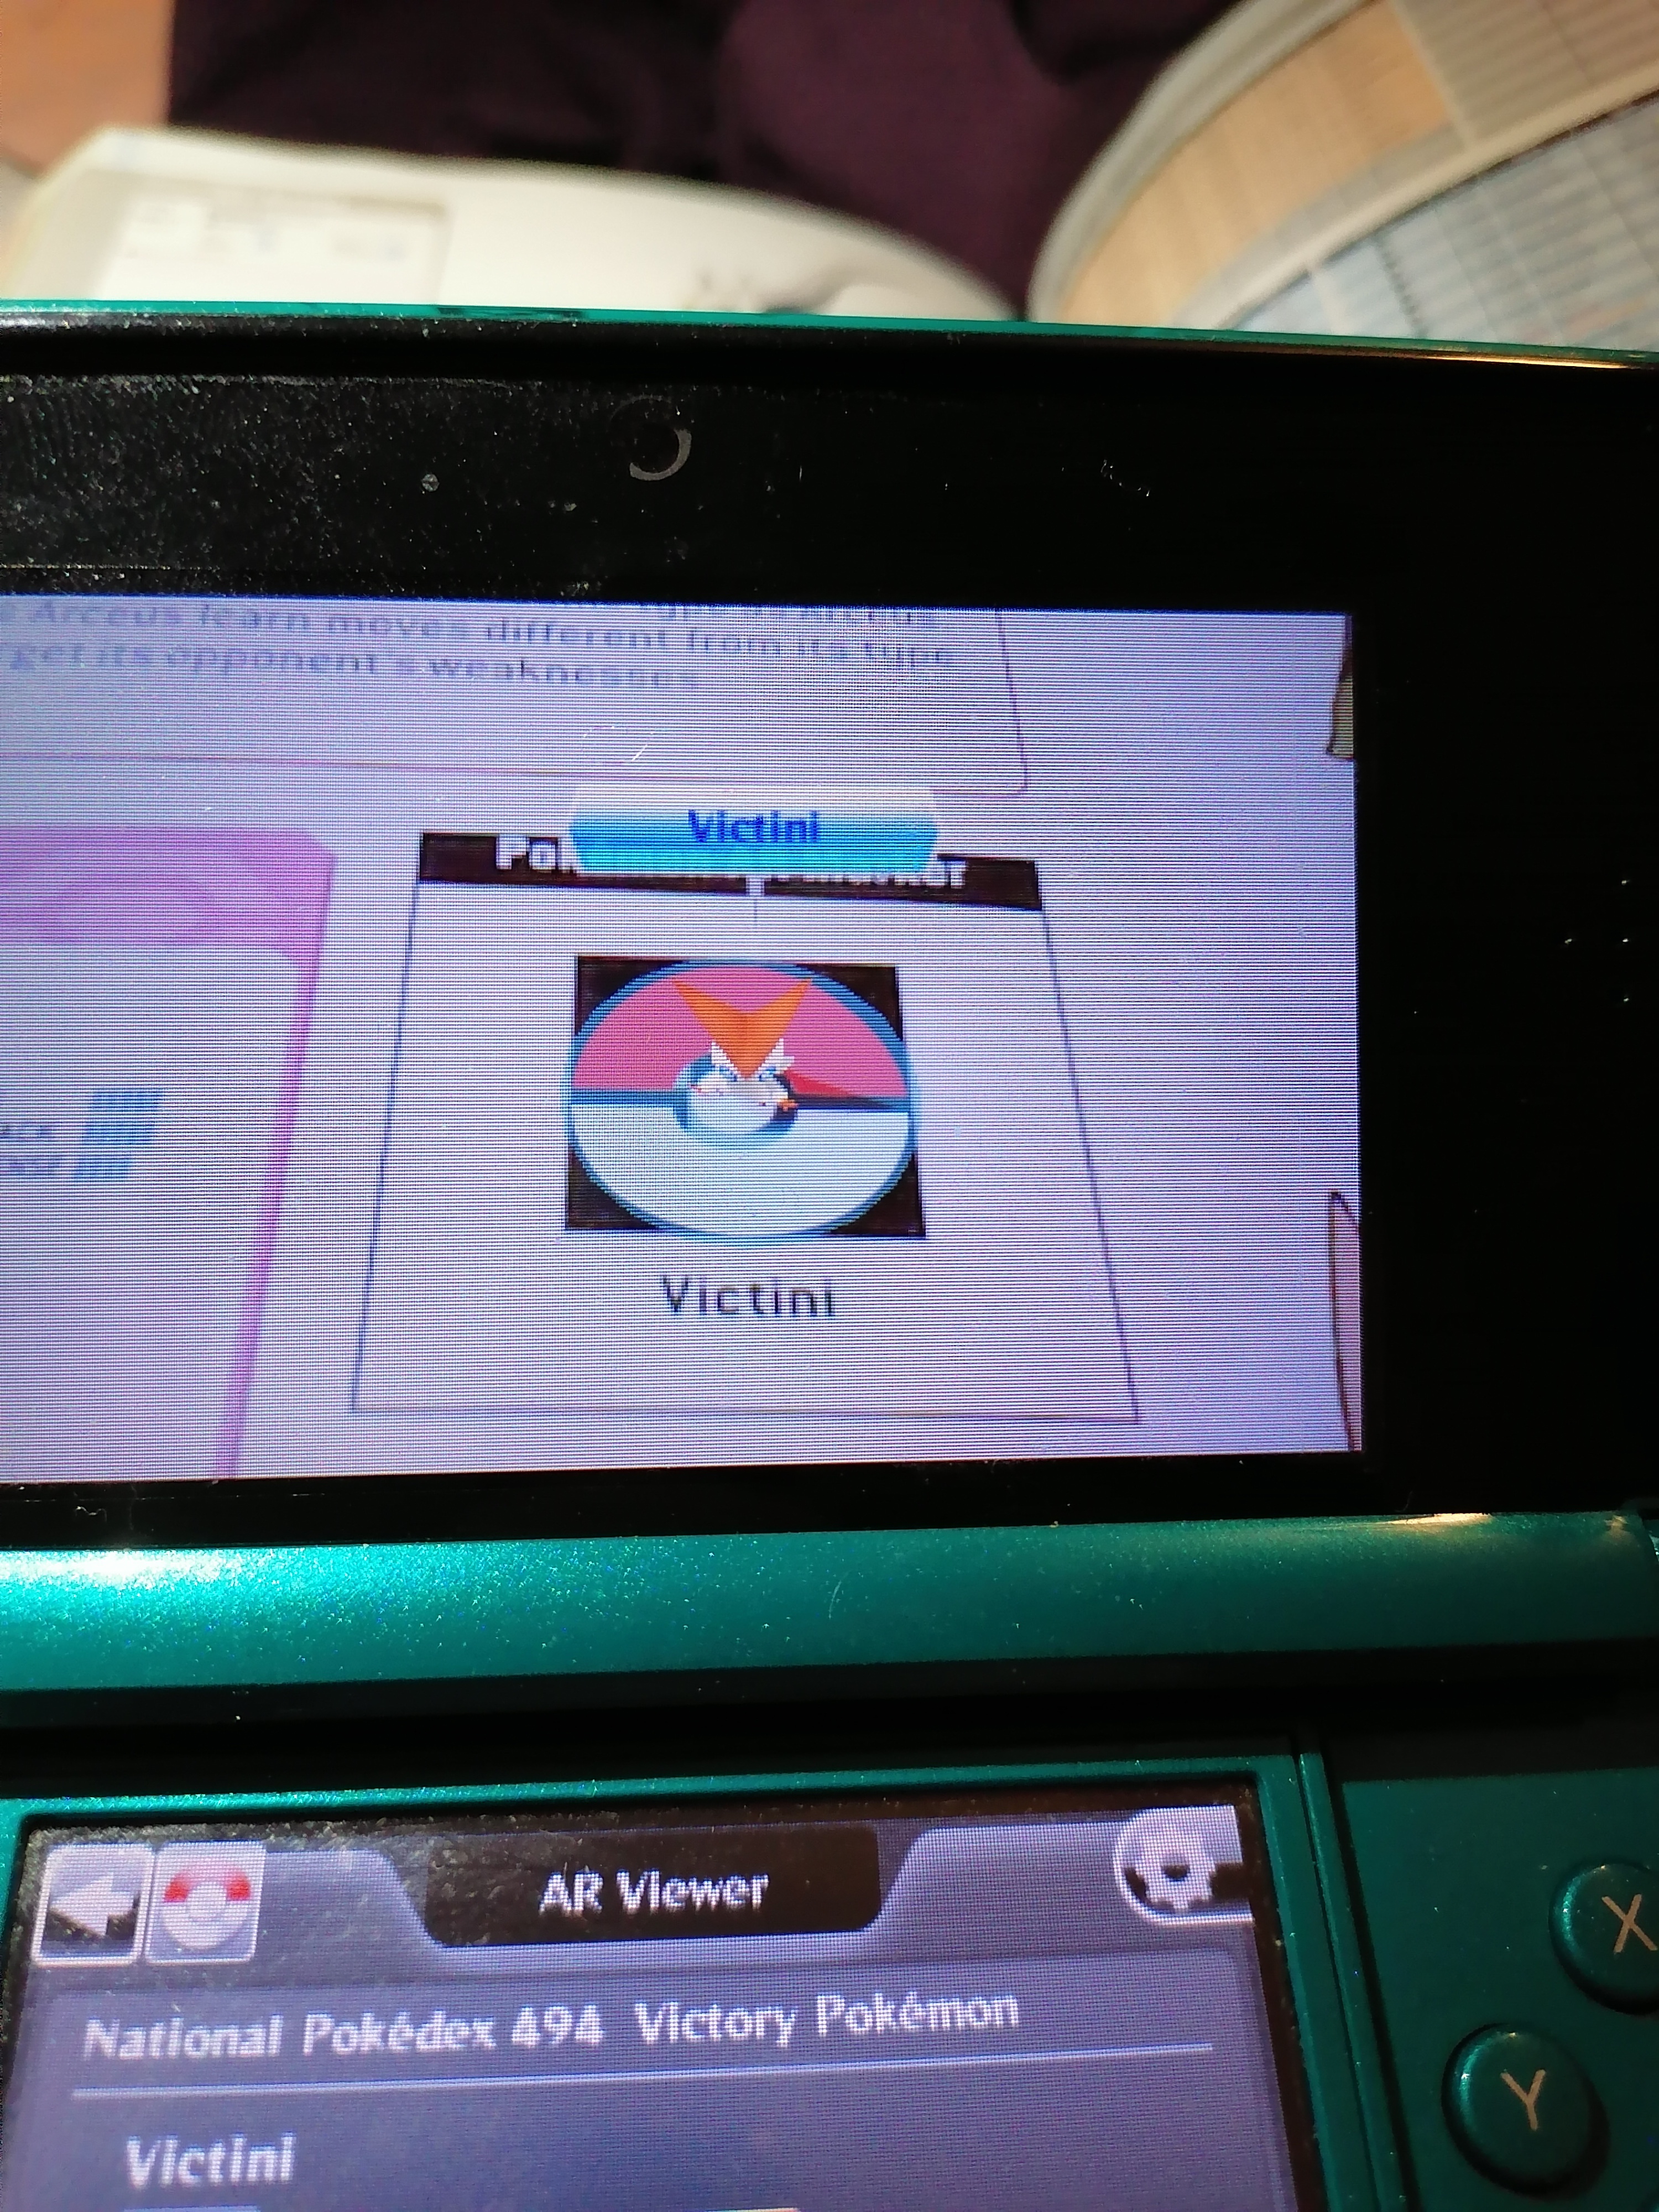 image 3ds screen which is live superimposing a 3d model of victini above its marker on the page of the book